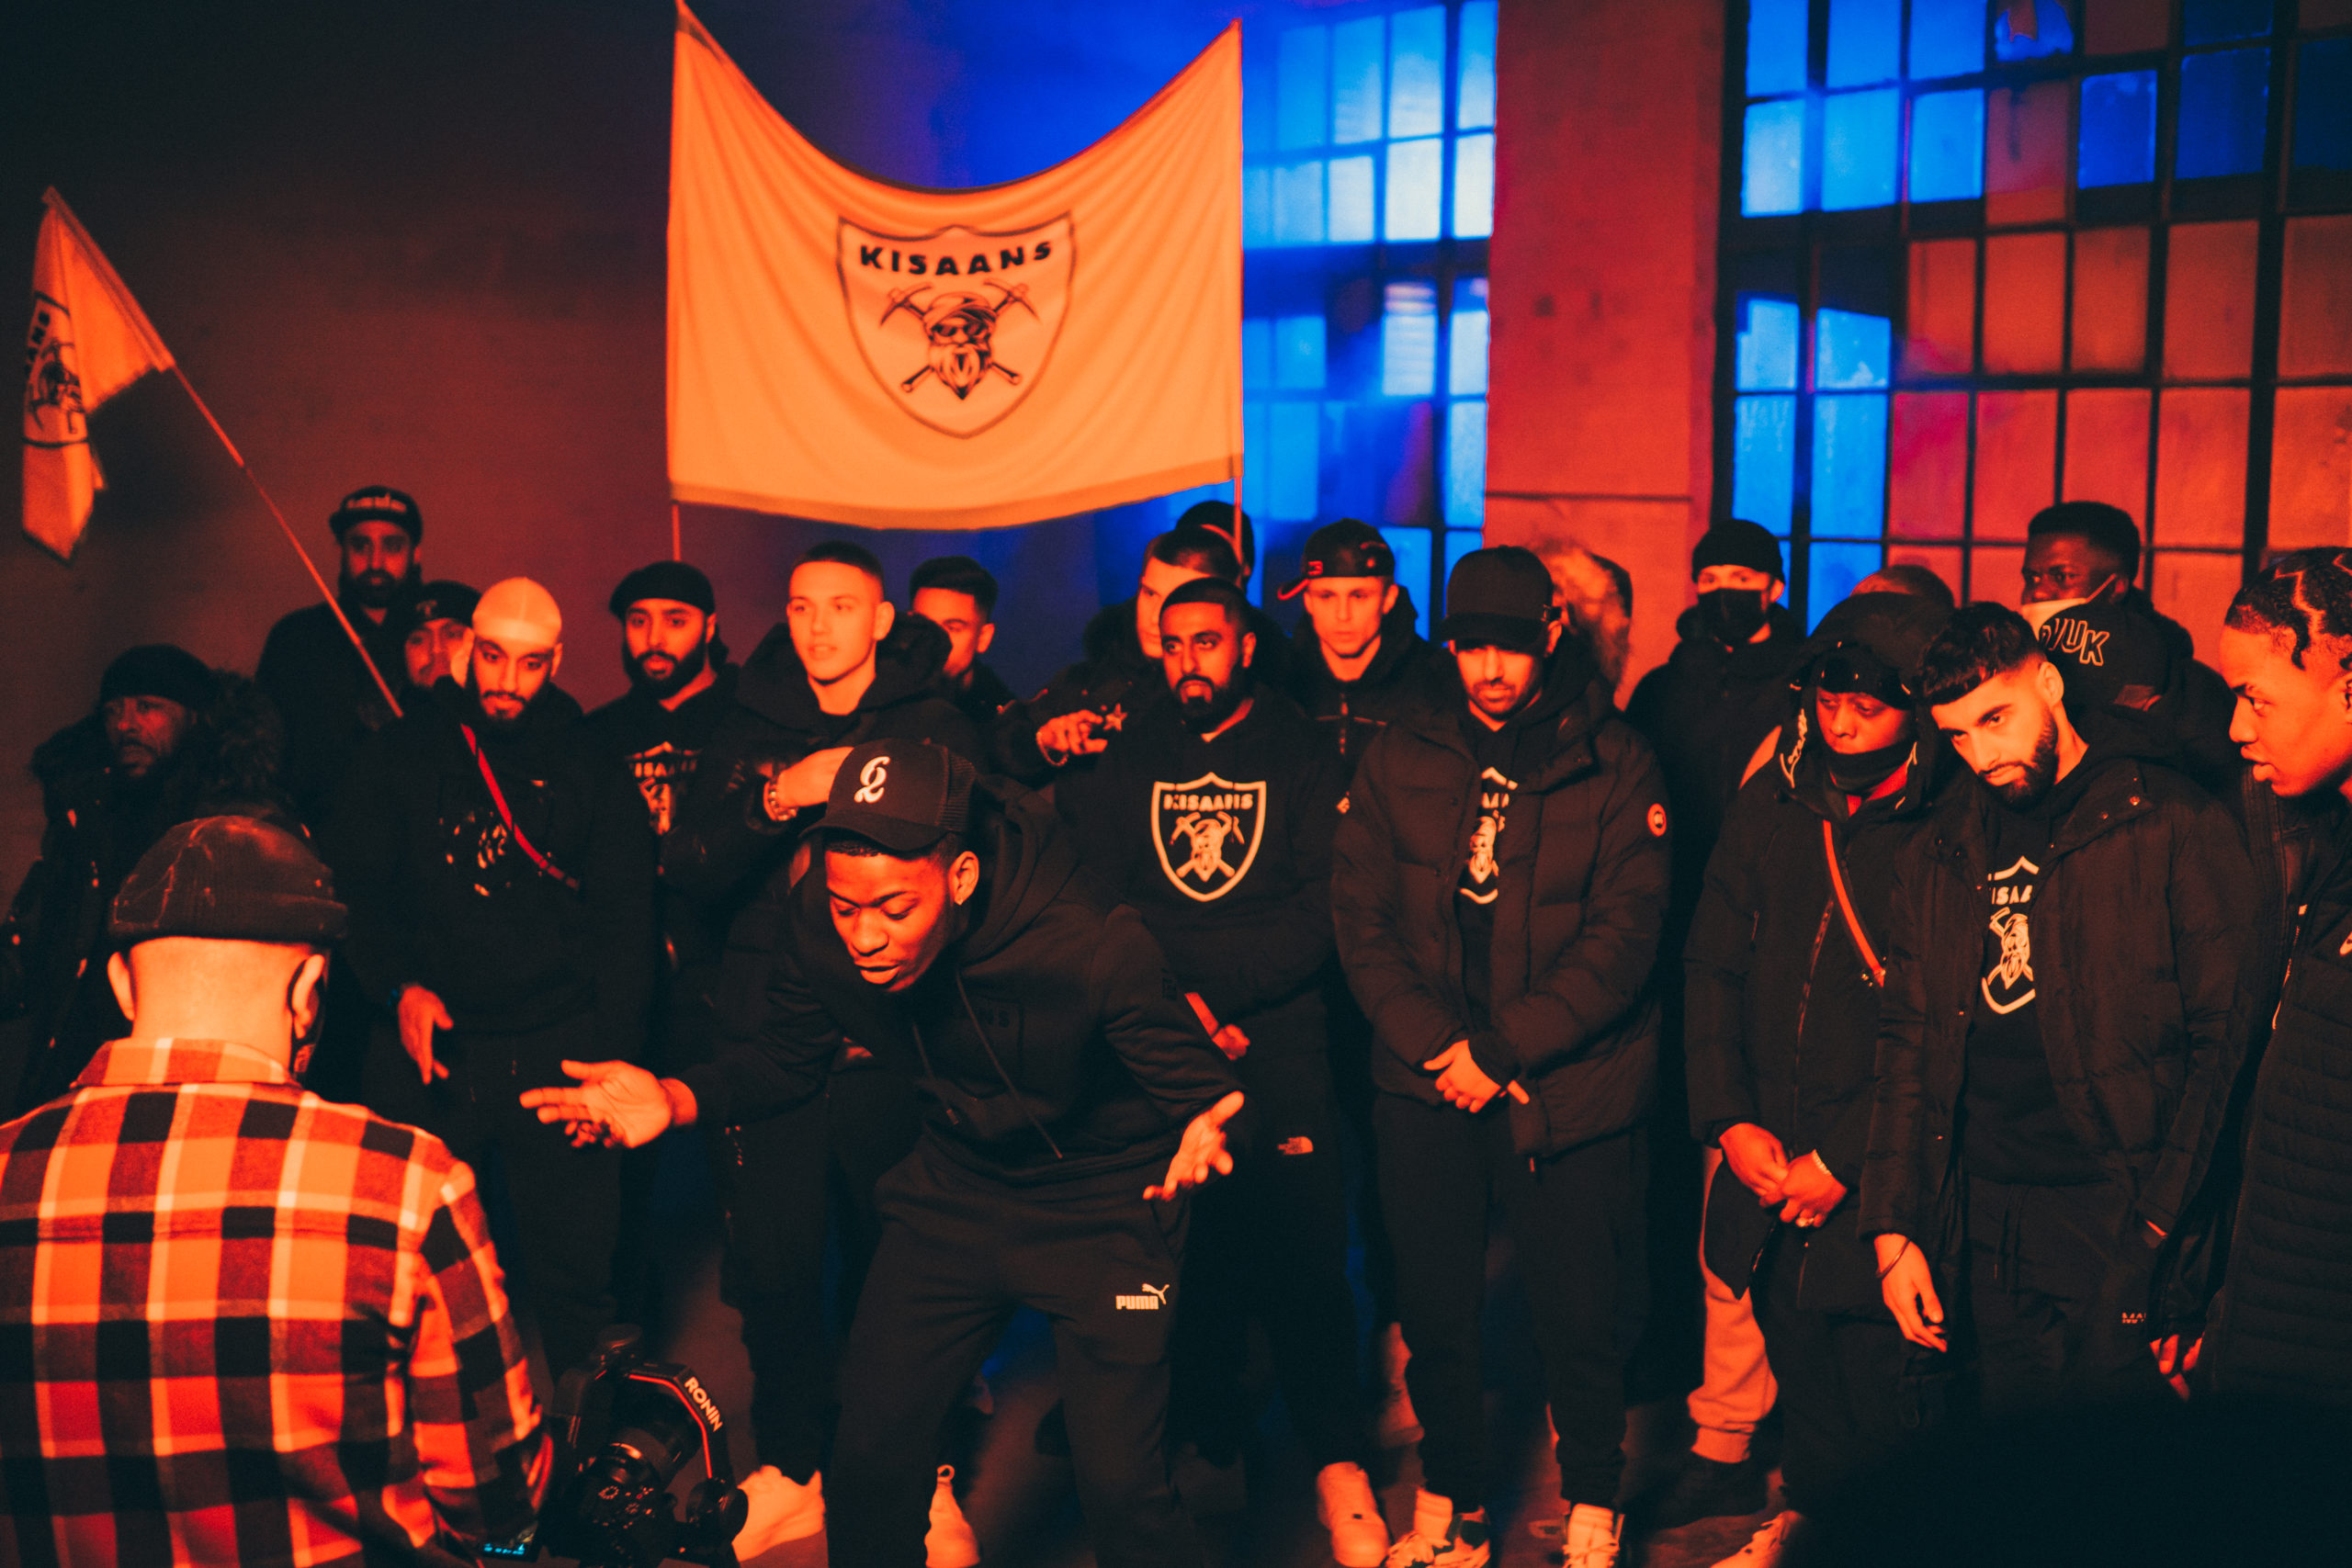 Coventry Producer Coolie [@Coolieuk] team’s up with Jay1 [@jay1offical], Temz [@temz._] and more for new single and video ‘KISAN’ to support the Indian Farmers Crisis